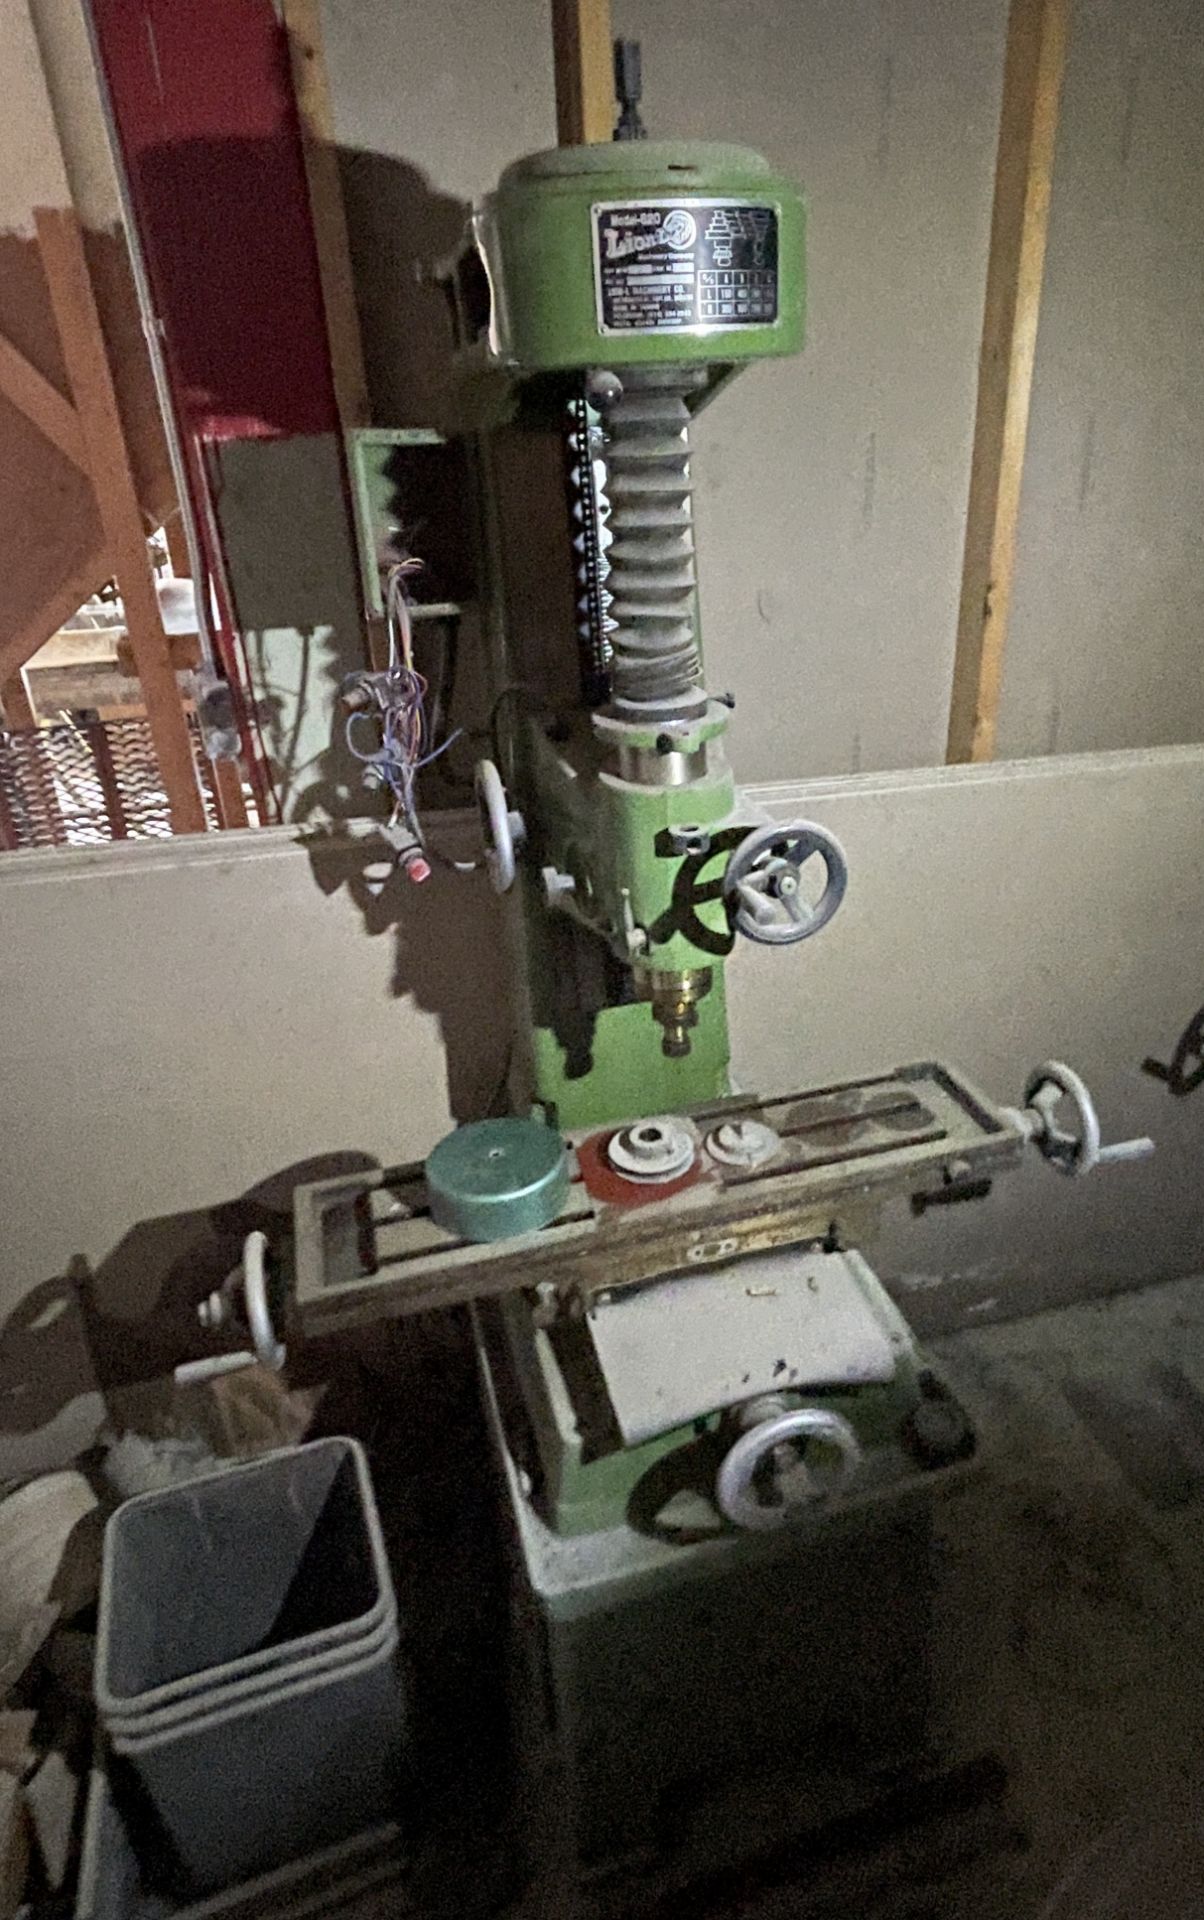 LION-L MODEL 820 COMMERCIAL DRILL PRESS - Image 2 of 5